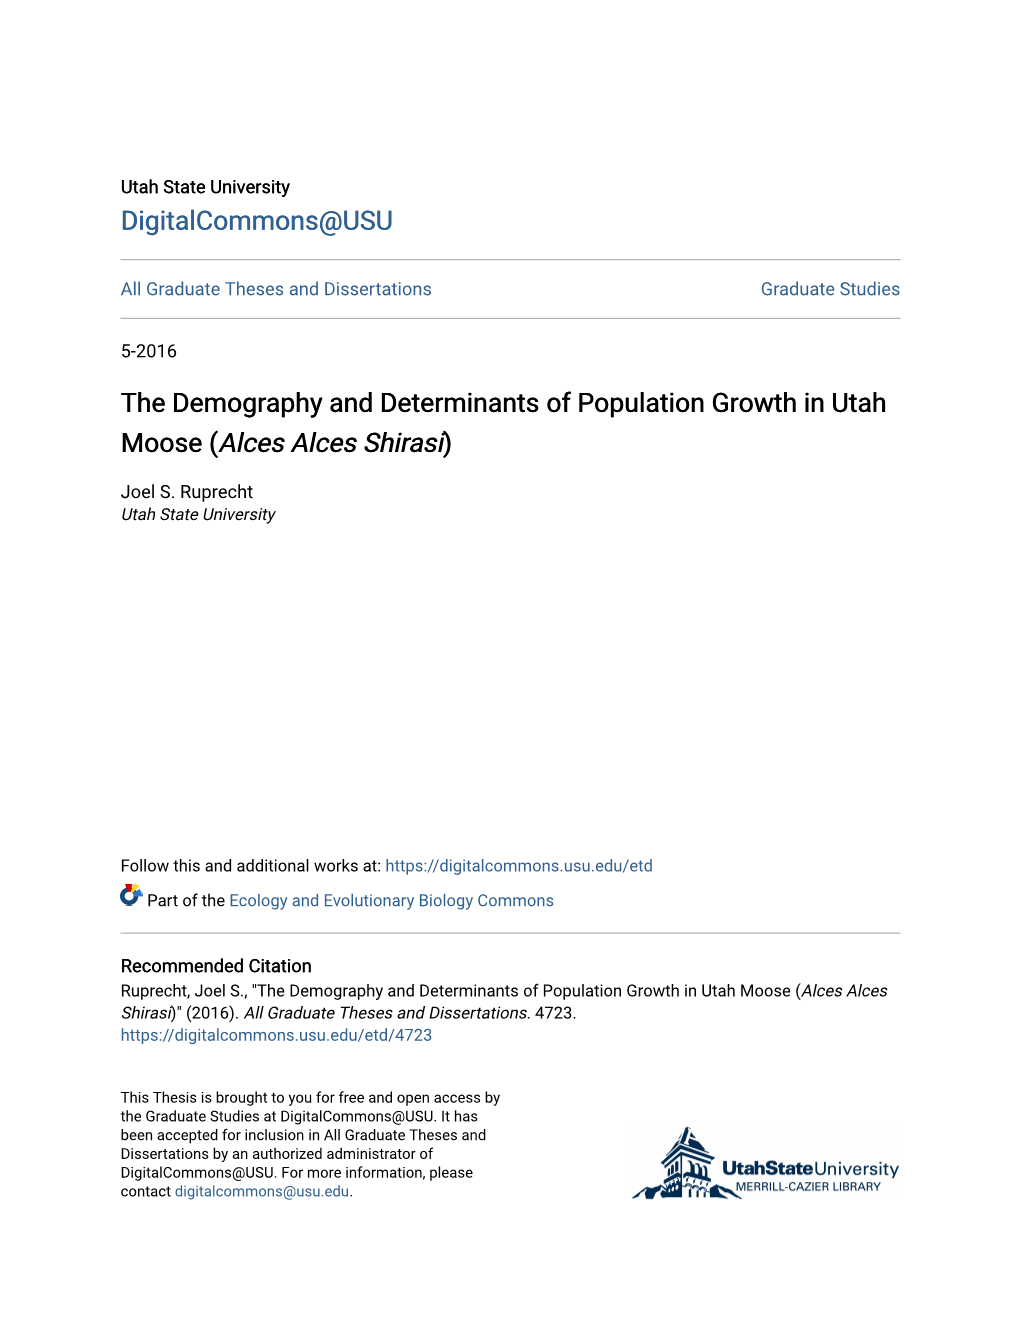 The Demography and Determinants of Population Growth in Utah Moose (&lt;I&gt;Alces Alces Shirasi&lt;/I&gt;)